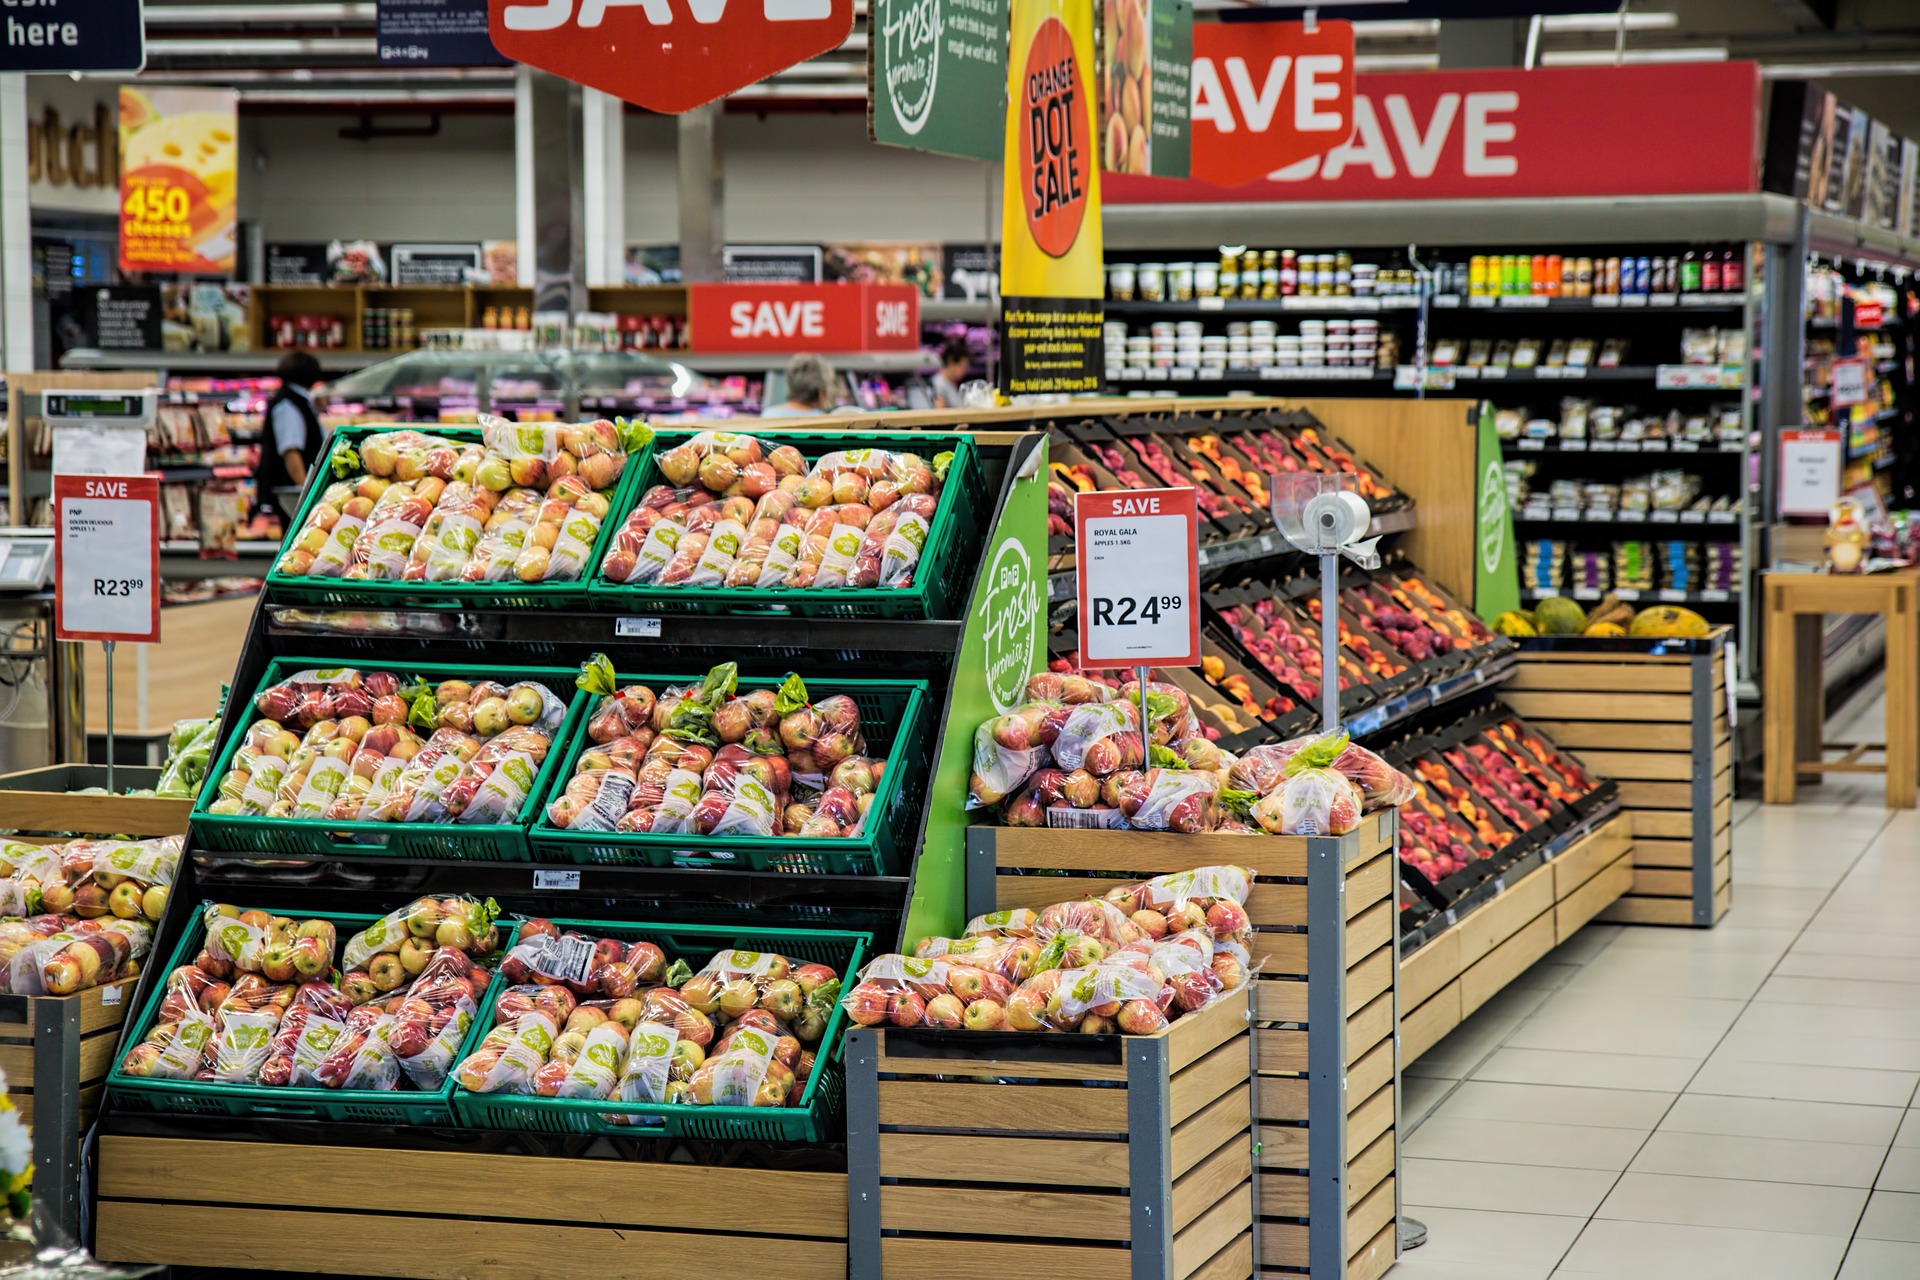 which south african supermarket offers the best prices this week?